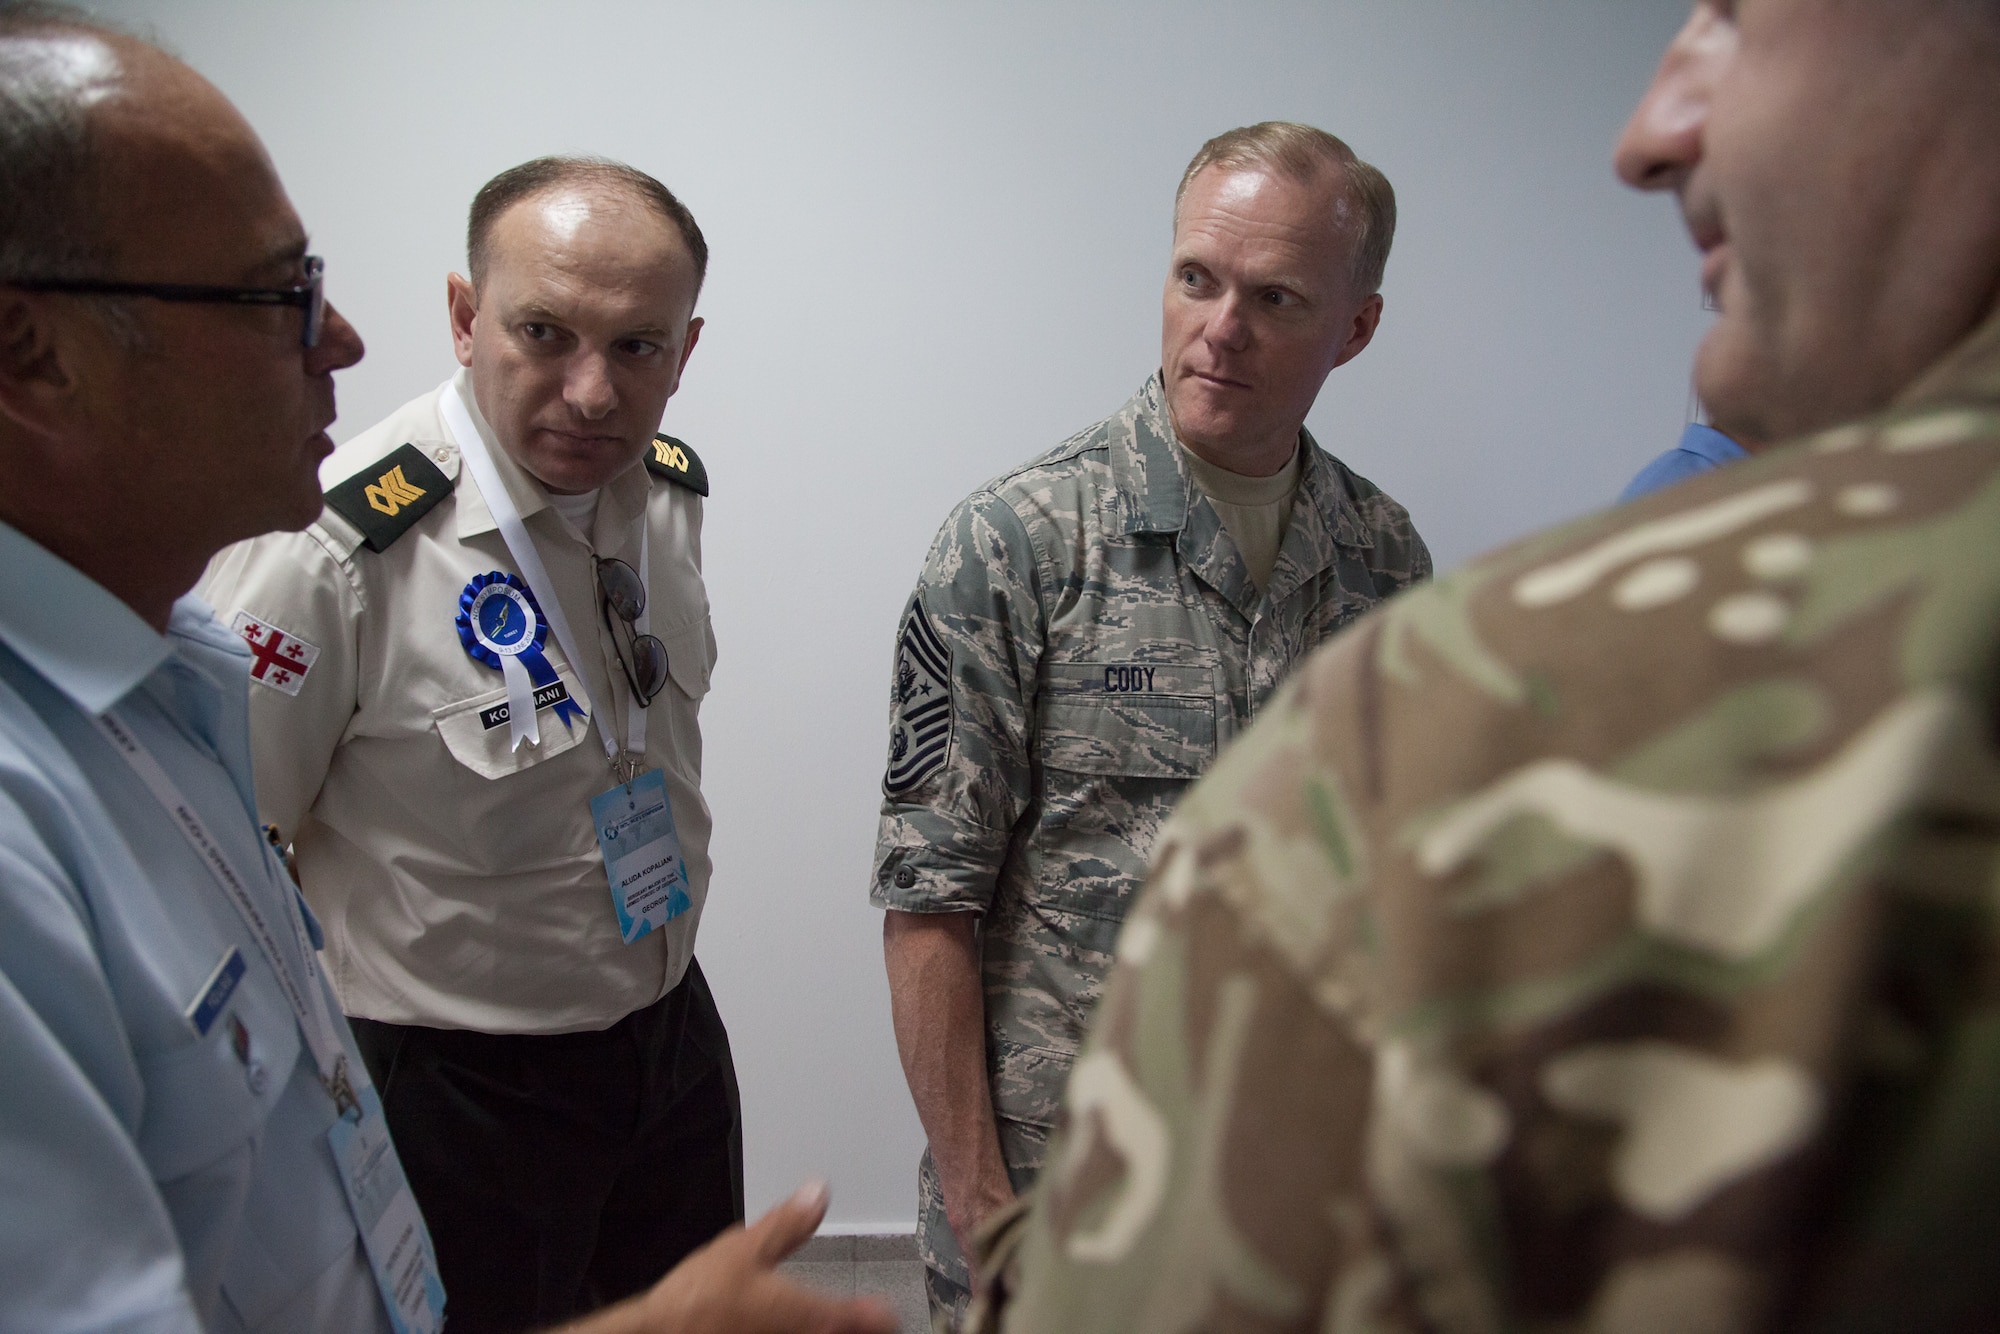 Chief Master Sgt. of the Air Force James Cody stops to chat with senior enlisted leaders from Georgia, Canada and United Kingdom during a tour of the Turkish air force NCO Academy June 12, 2014, in Izmir, Turkey. The tour was part of the Turkish Air Force International NCO Symposium, which brought together the top senior enlisted Airmen from 20 air forces around the world to exchange ideas and enhance interoperability. (U.S. Air Force photo/Senior Master Sgt. Lee E. Hoover Jr.)